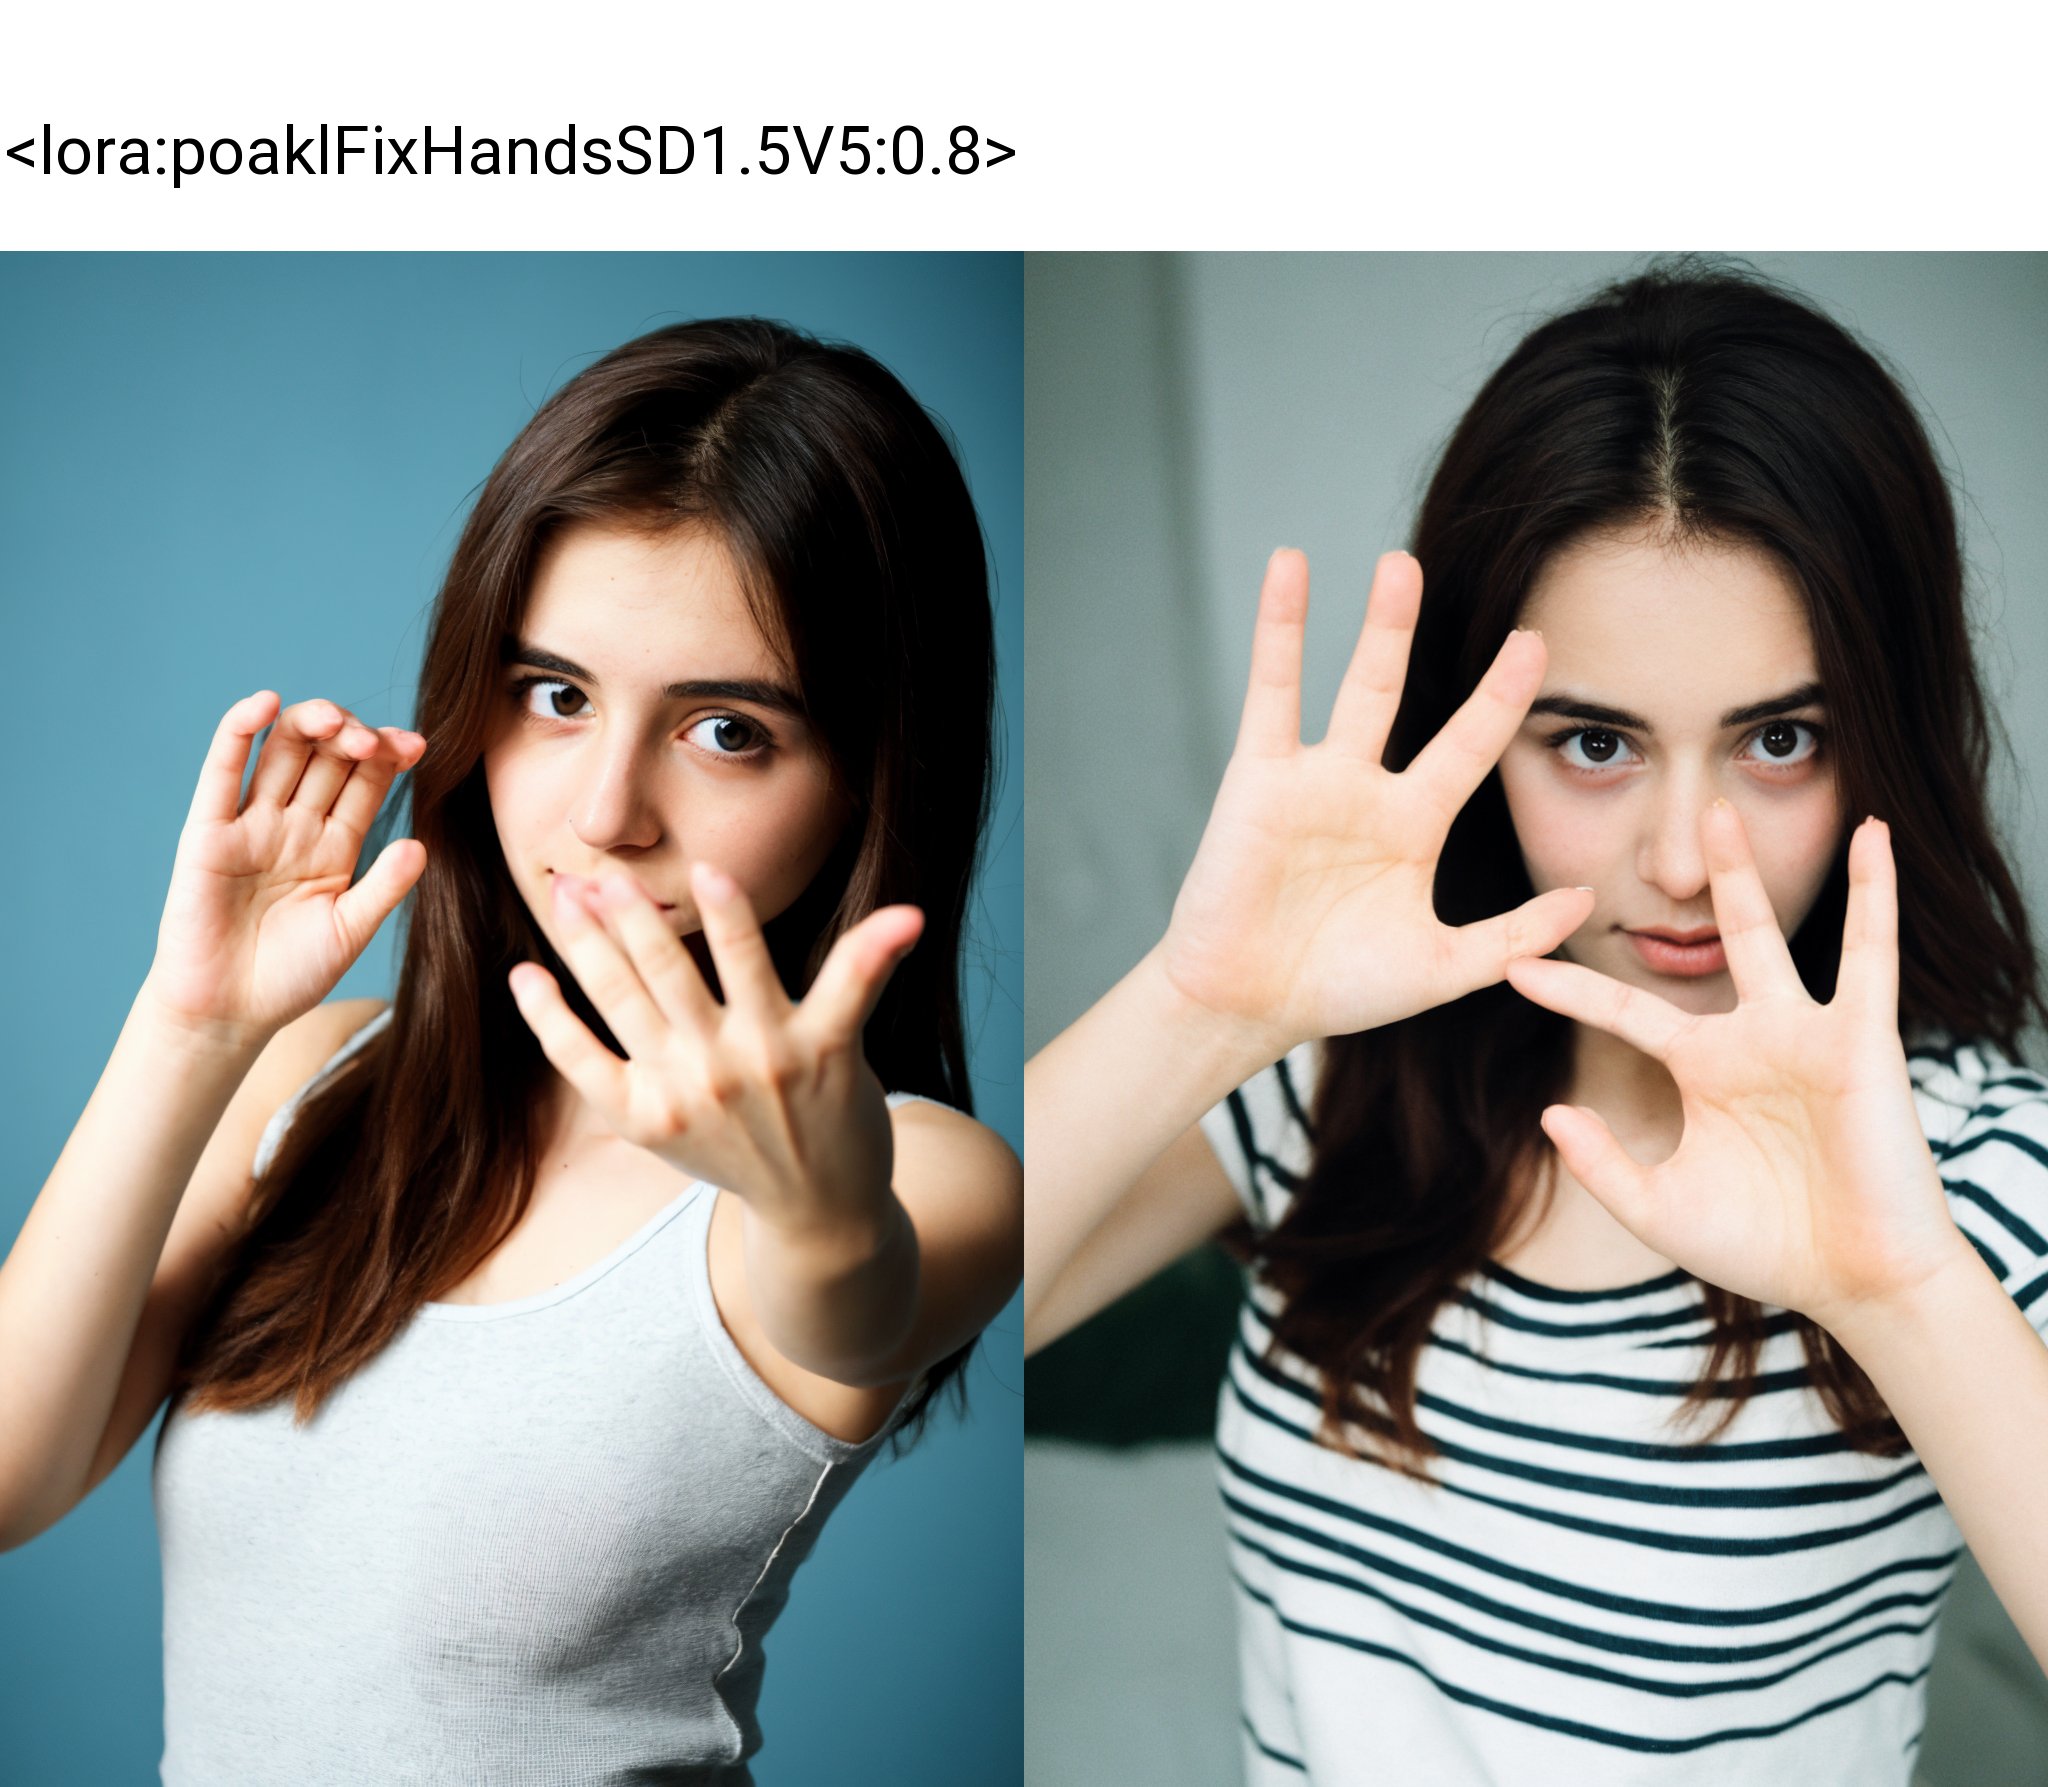 a young 20yo girl showing both of her hand fingers at camera with,((poakl)),<lora:poaklFixHandsSD1.5V5:0.8>,